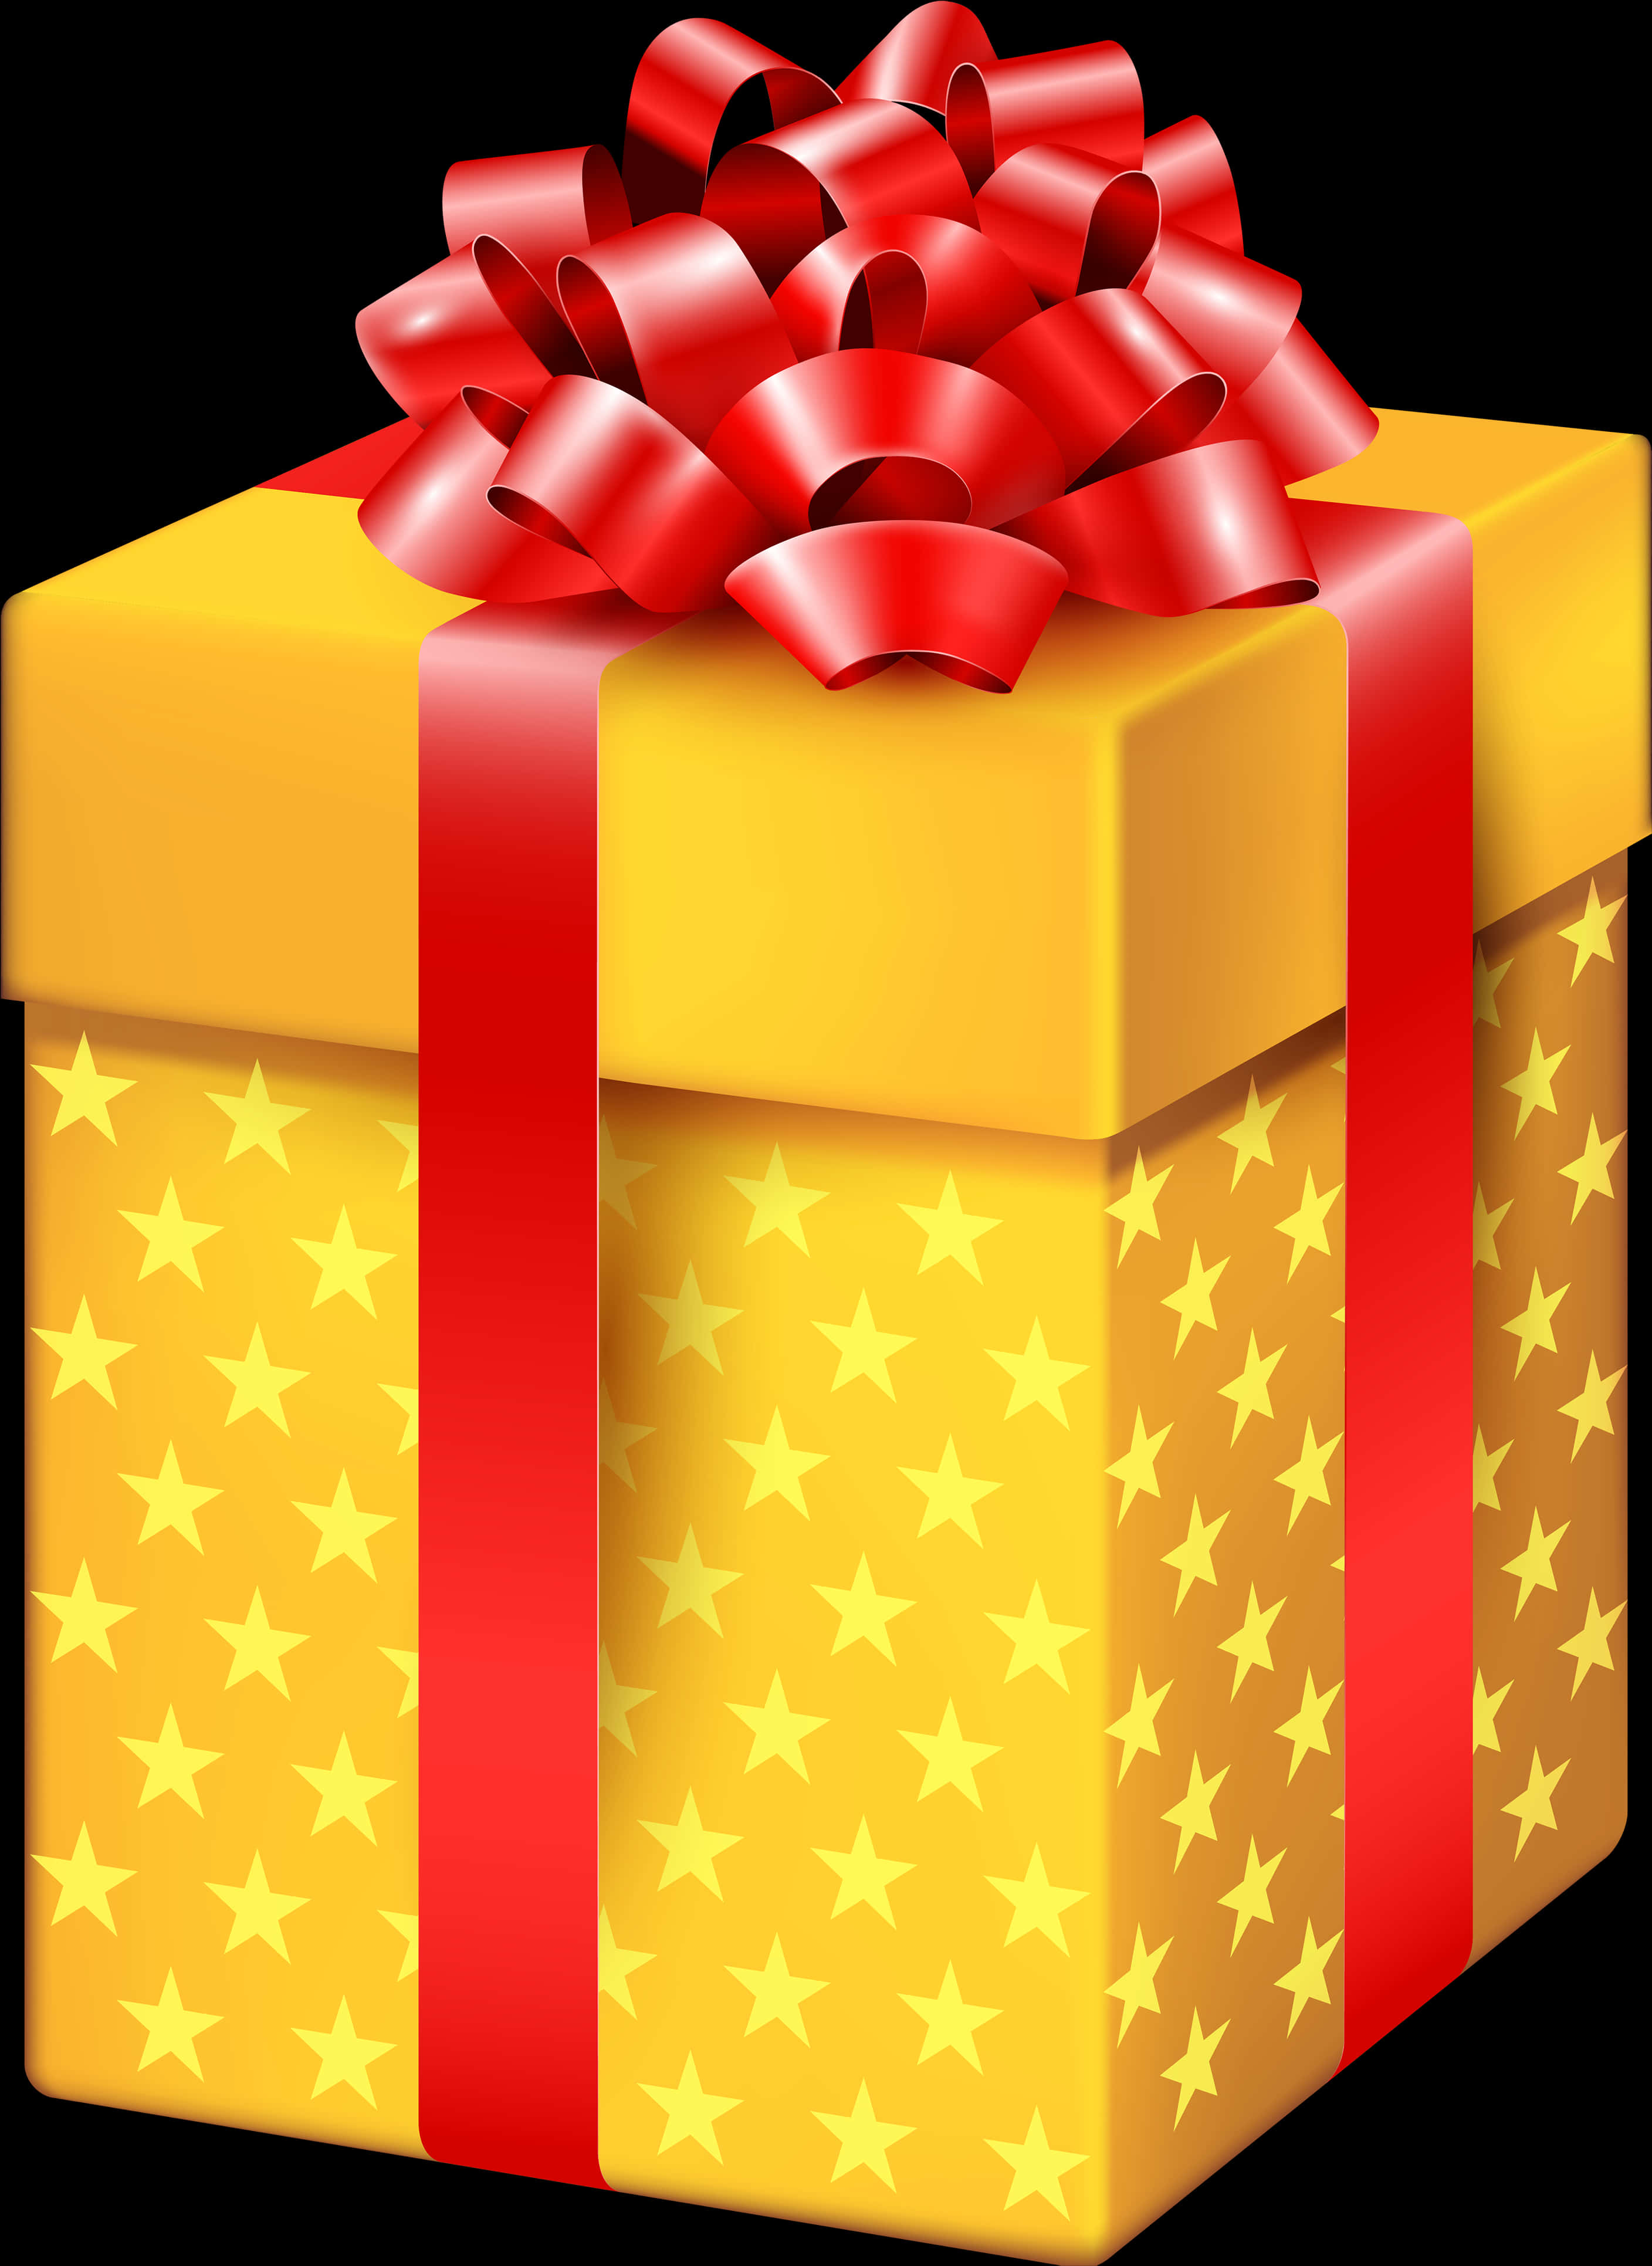 Download Present Png File For Designing Projects - Transparent Background Gift Png, Png Download